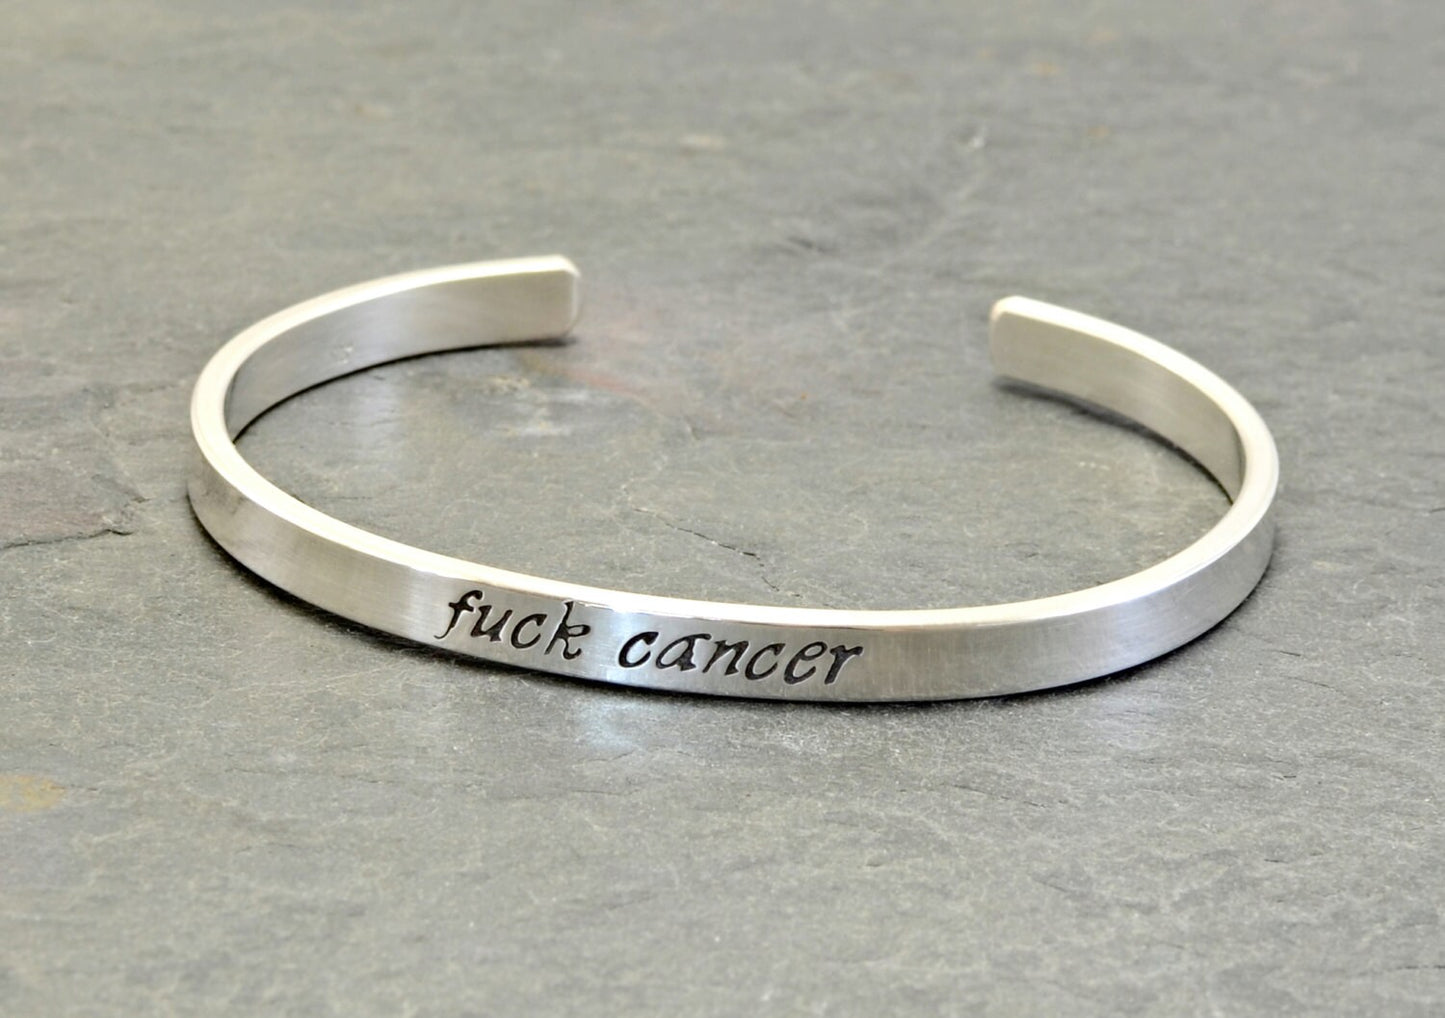 Sterling silver cuff bracelet with f@ck cancer